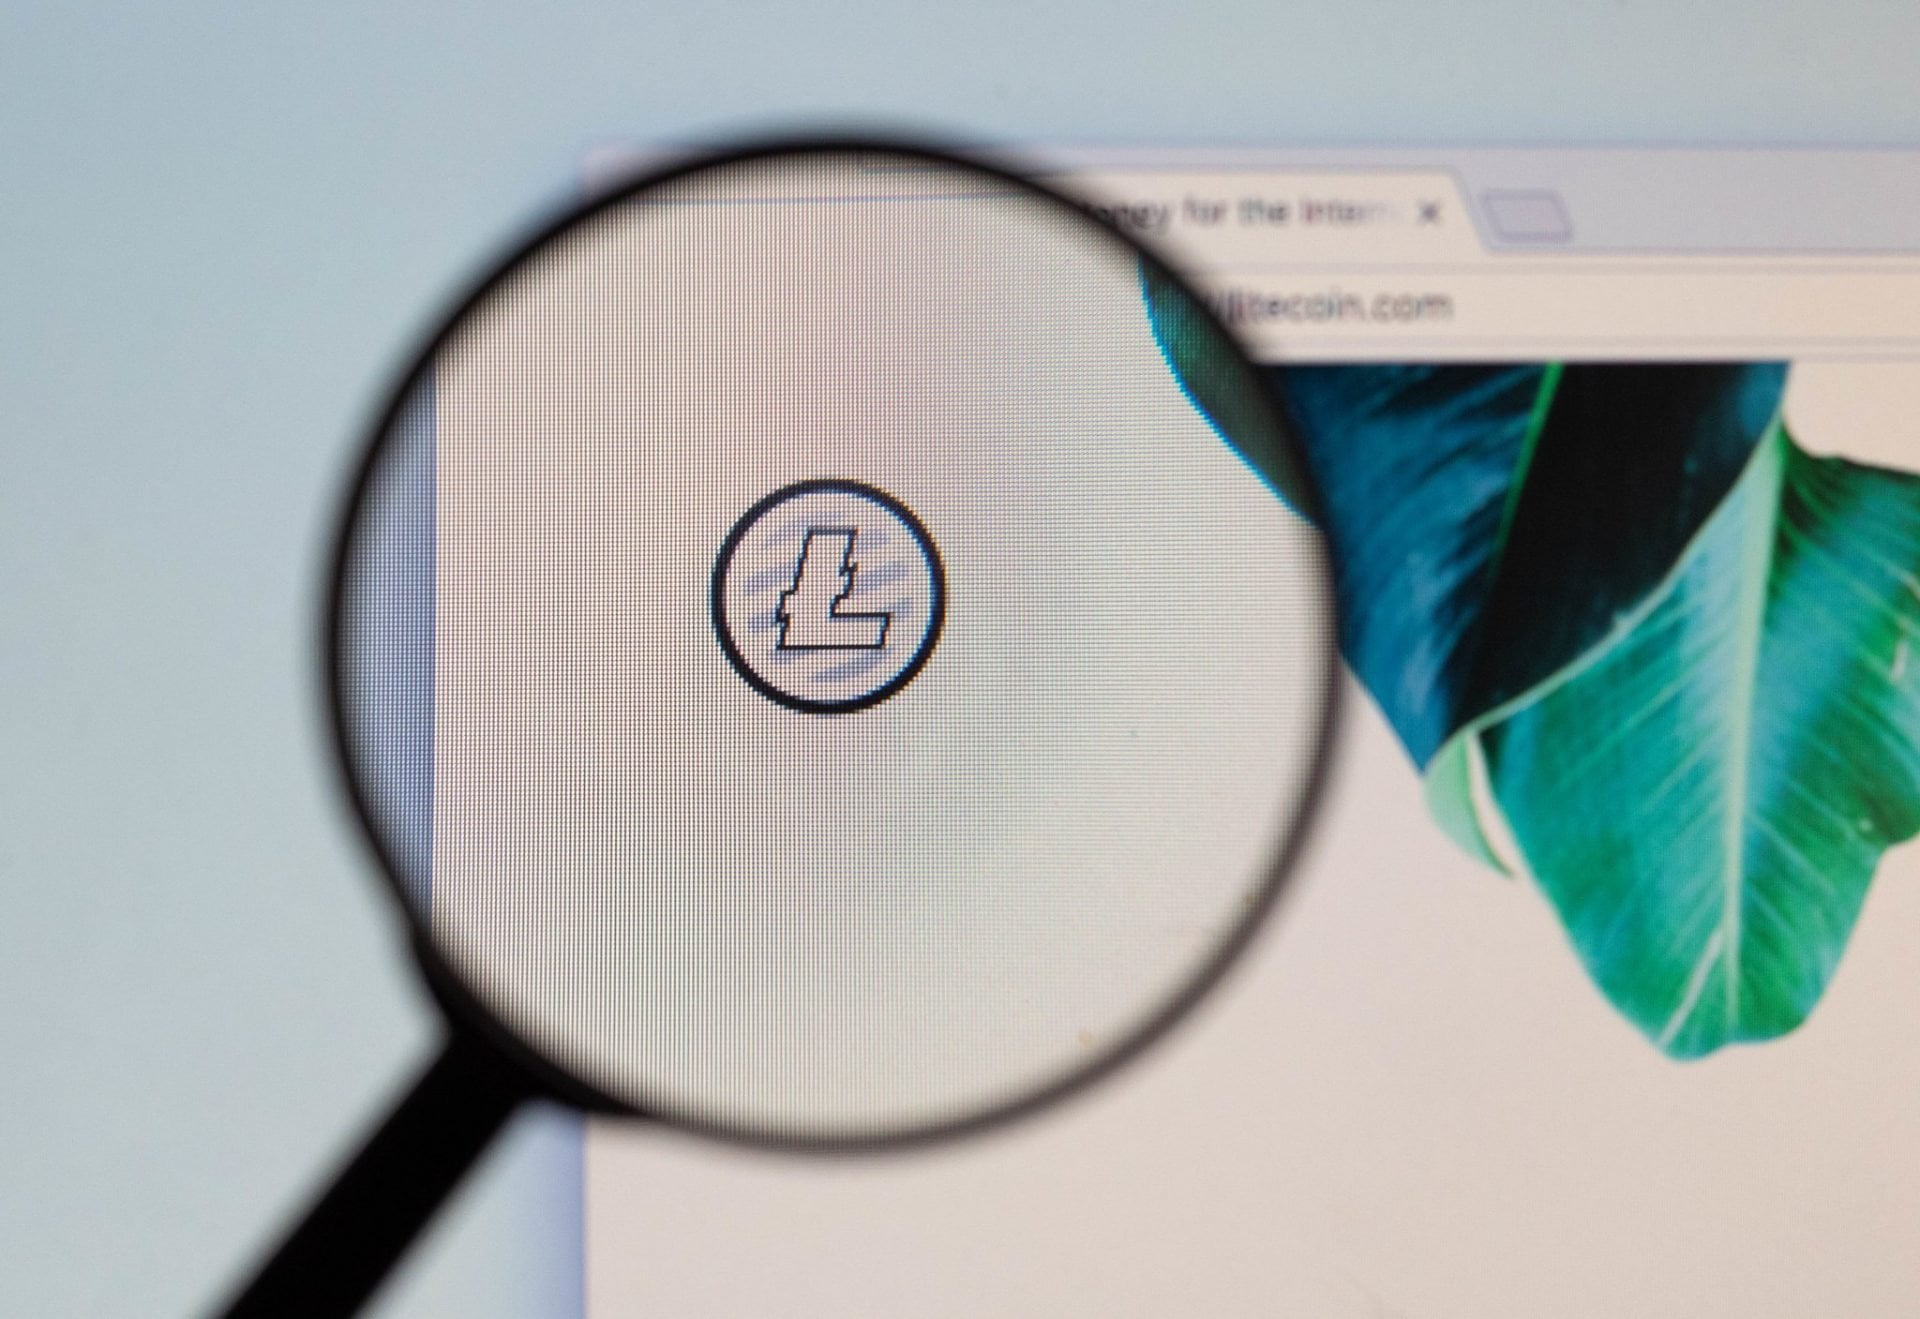 Litecoin Foundation Board Reassures Crypto Community After "FUD" 21